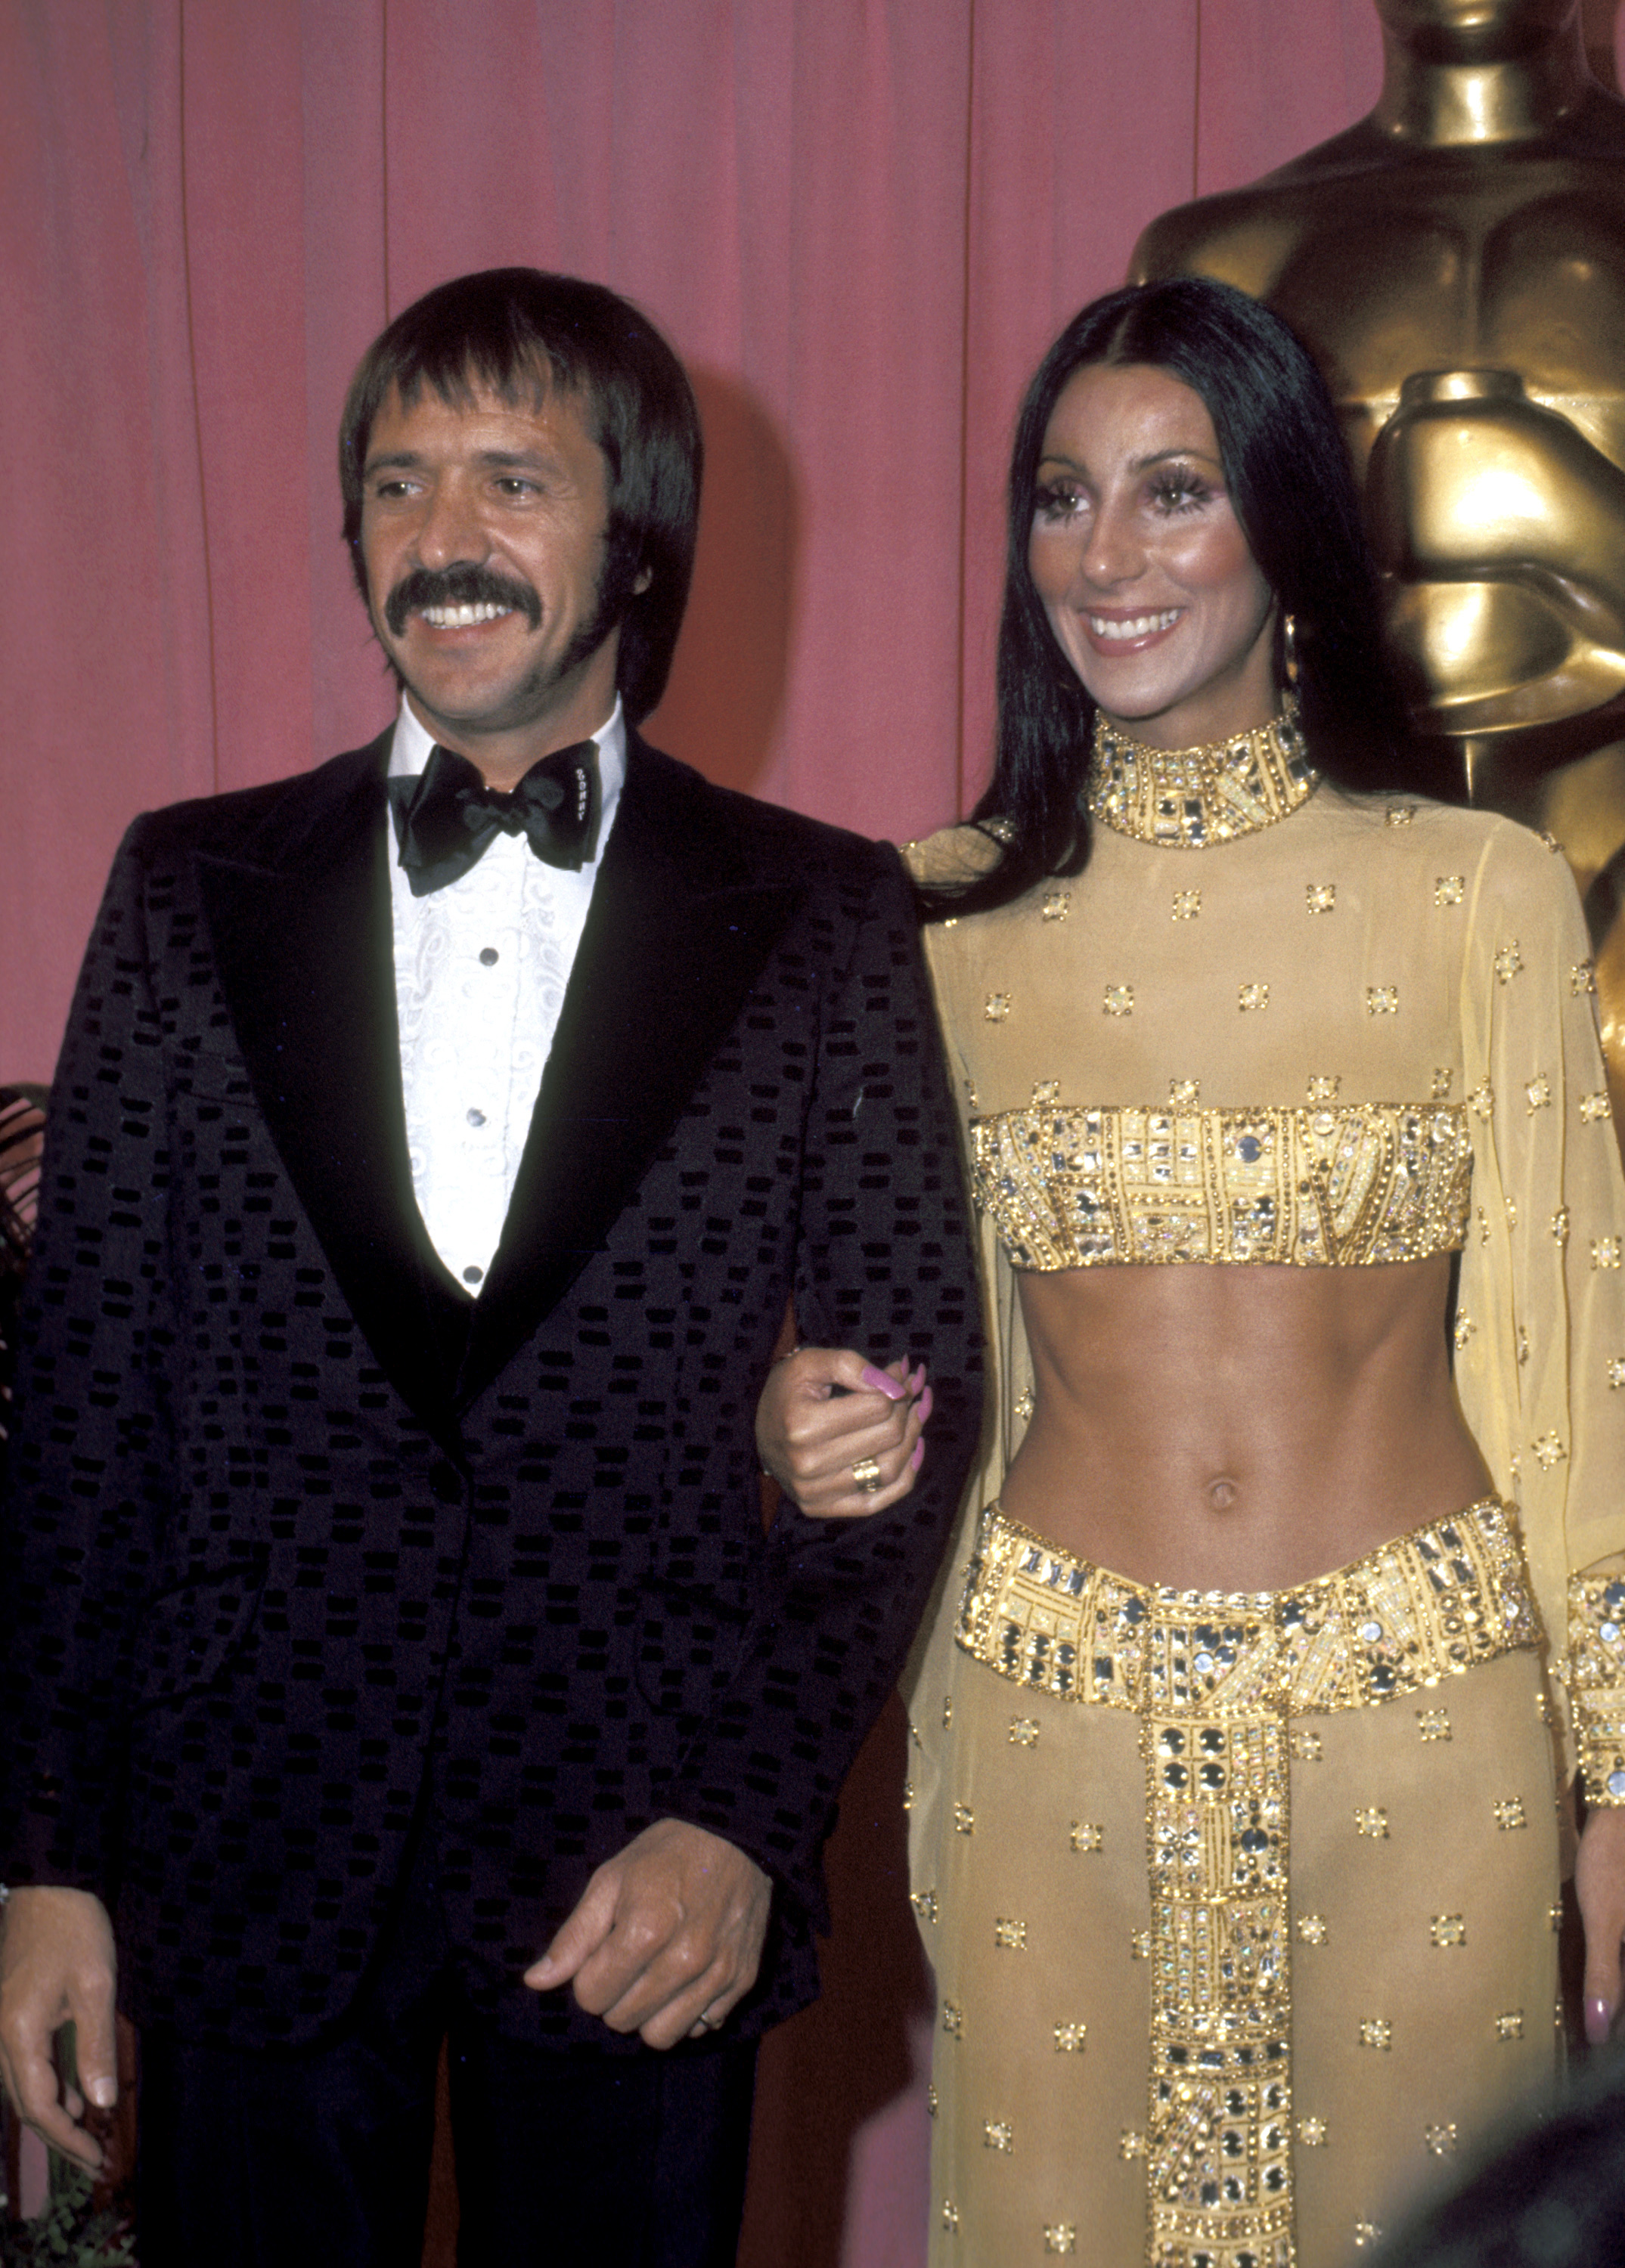 Sonny Bono and Cher at the 45th Annual Academy Awards | Source: Getty Images